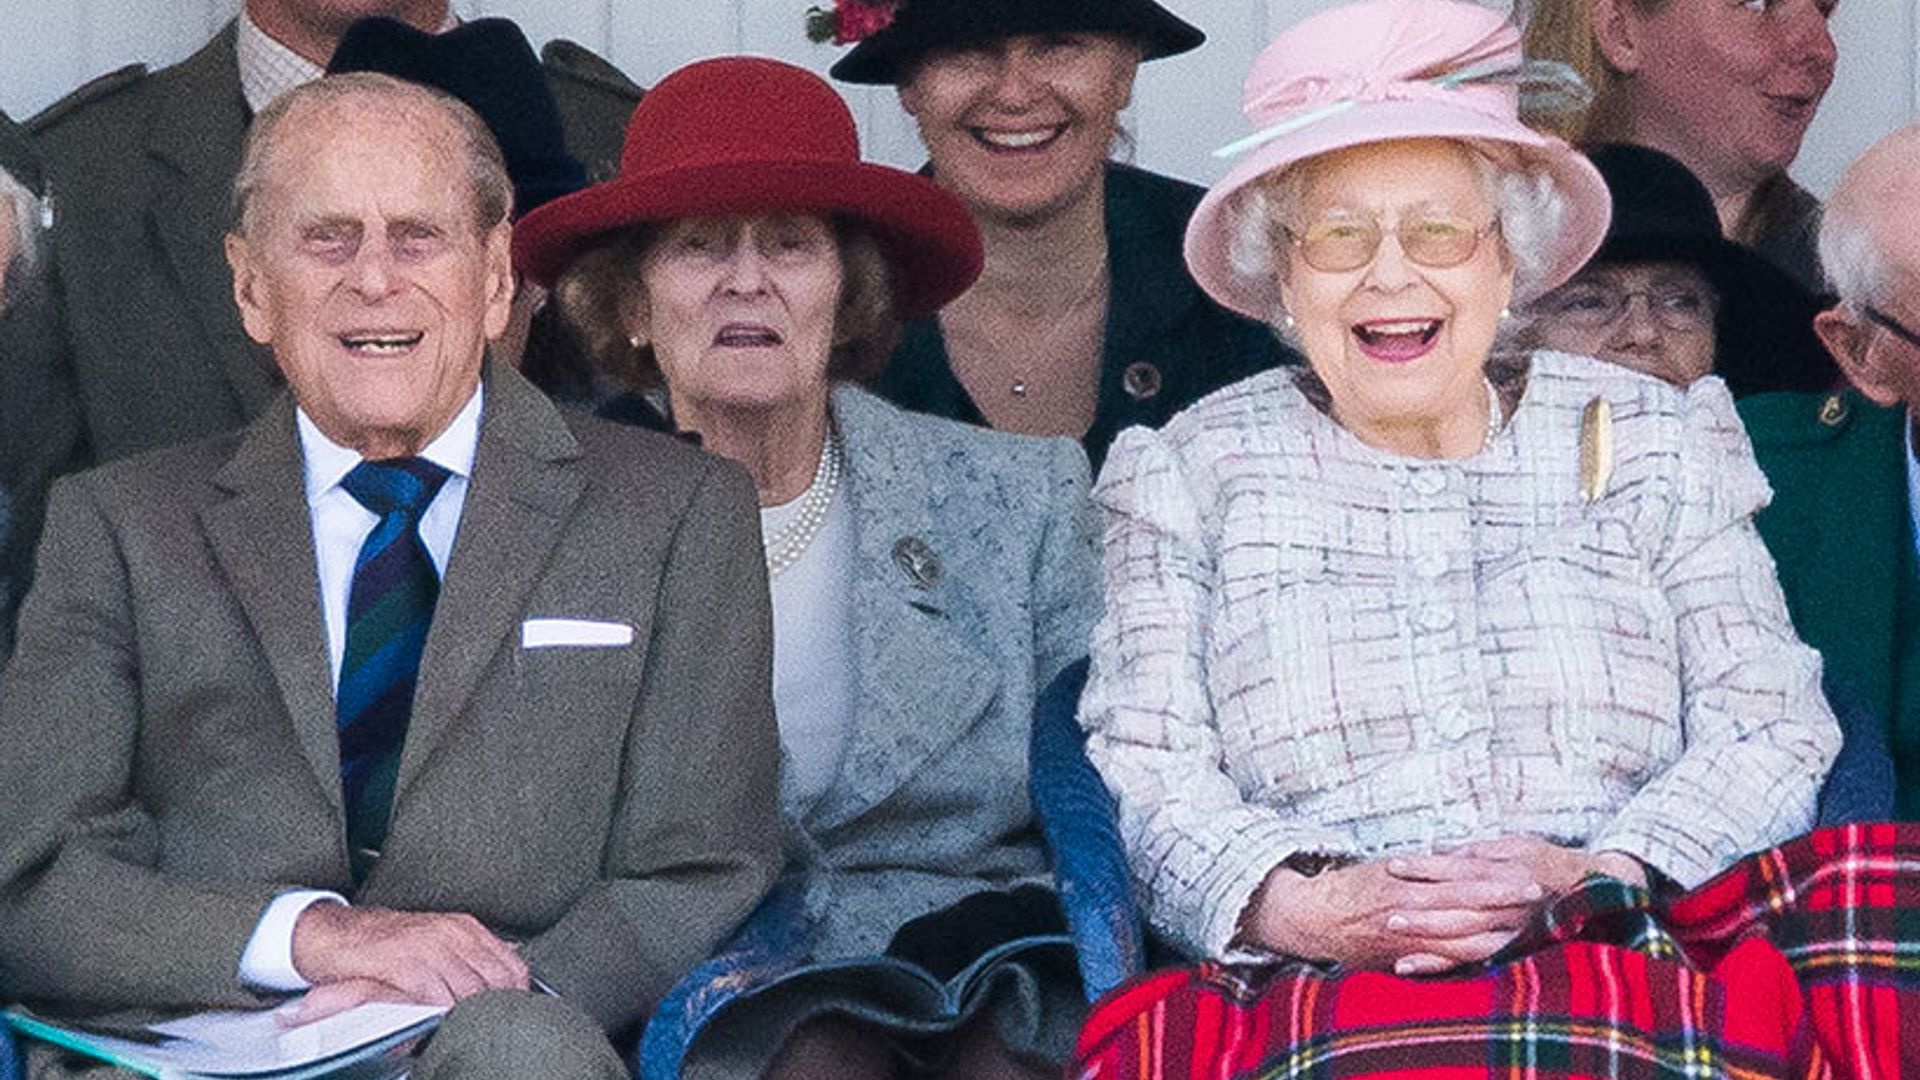 The Queen and Prince Philip happily reunite in public after Philip's absence at Trooping the Colour